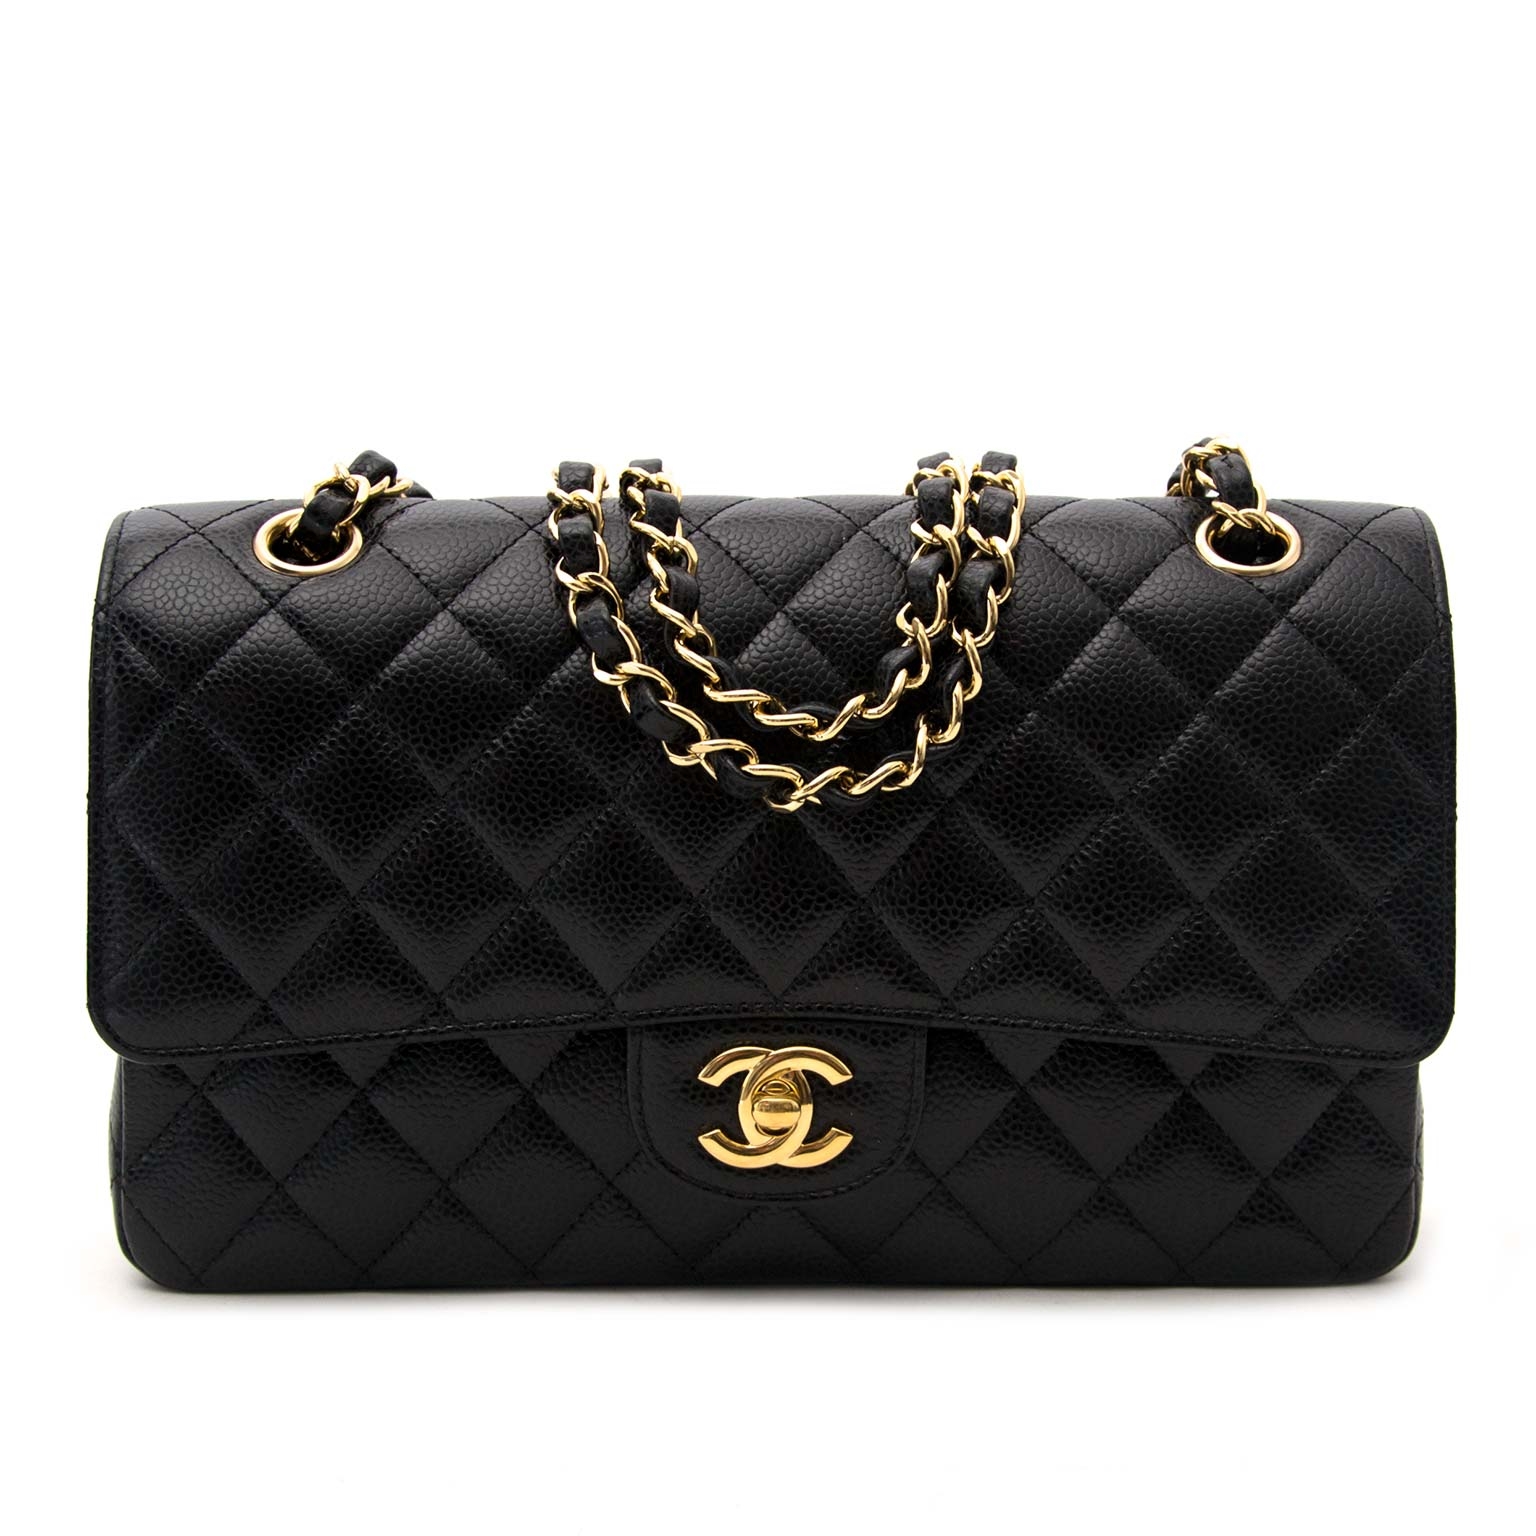 Ive Given Up On Buying a Chanel Bag and I Cant Be The Only One   PurseBlog